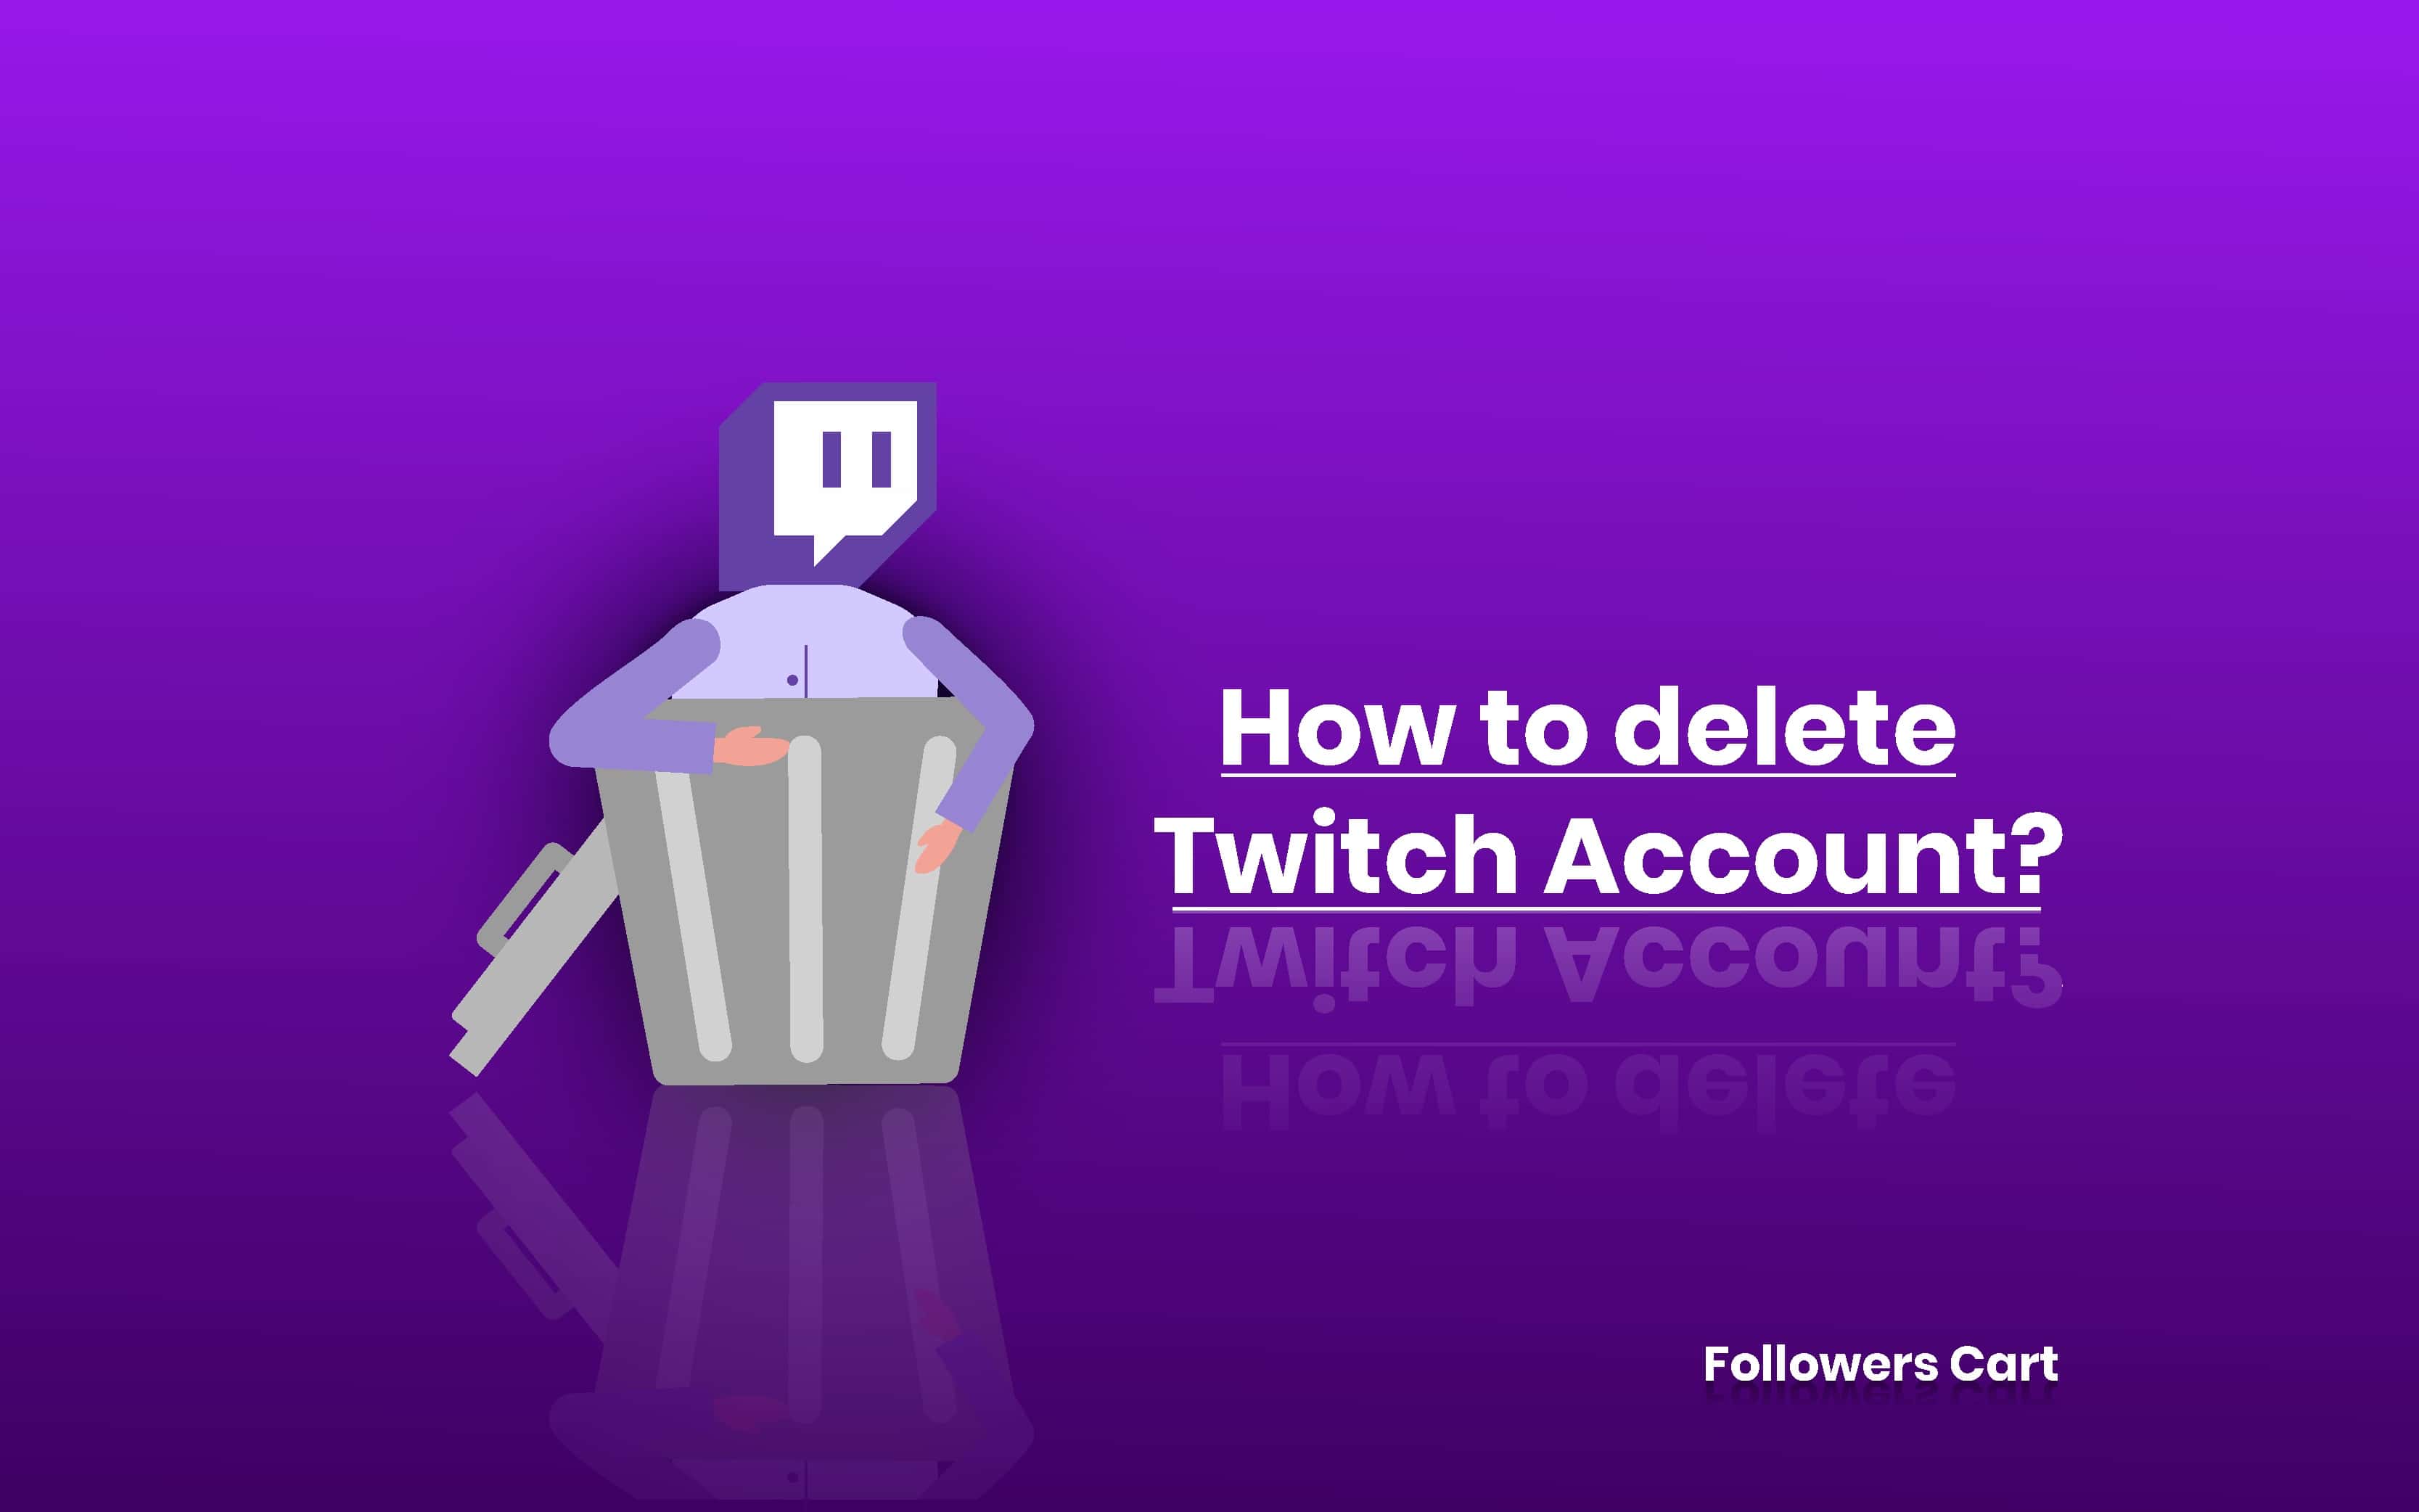 How to Delete Your Twitch Account?